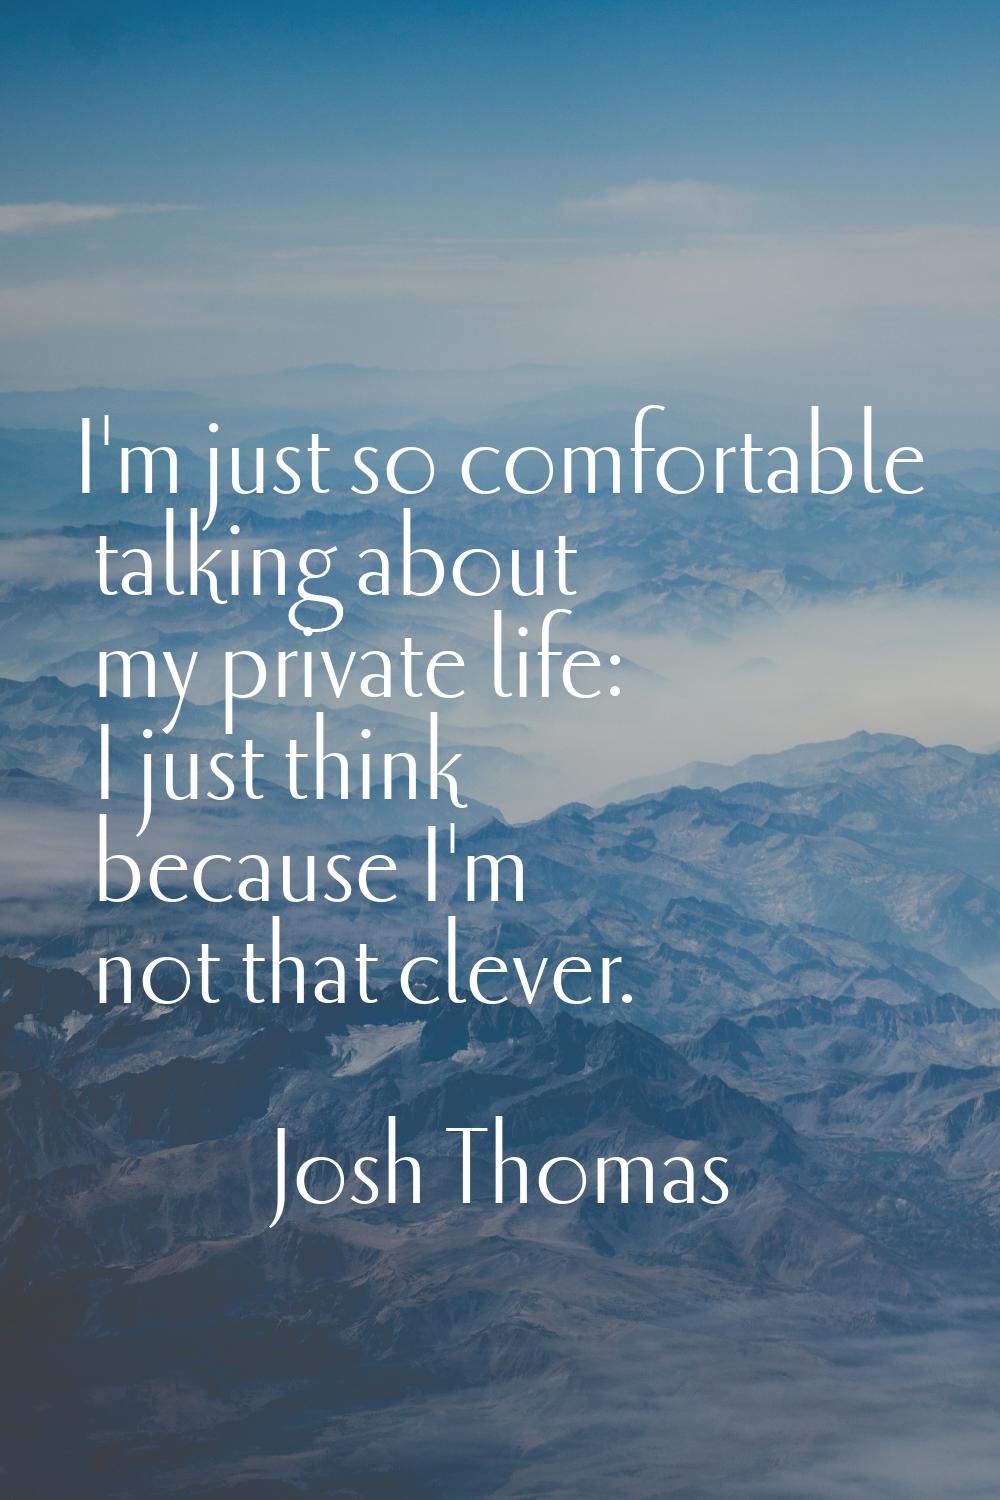 I'm just so comfortable talking about my private life: I just think because I'm not that clever.